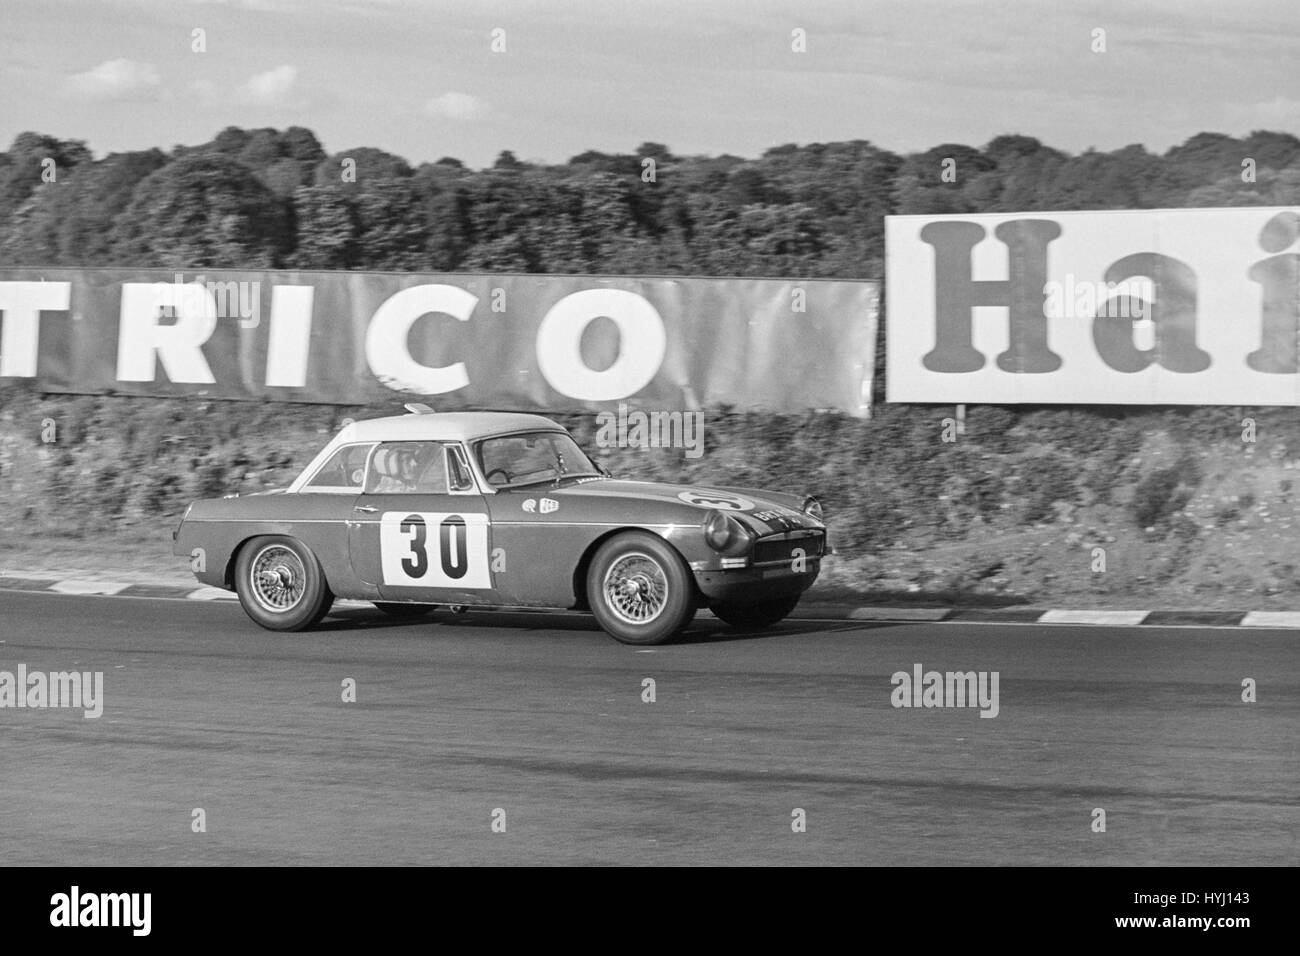 MGB racing car at Brands Hatch in England in the 1960s. Stock Photo